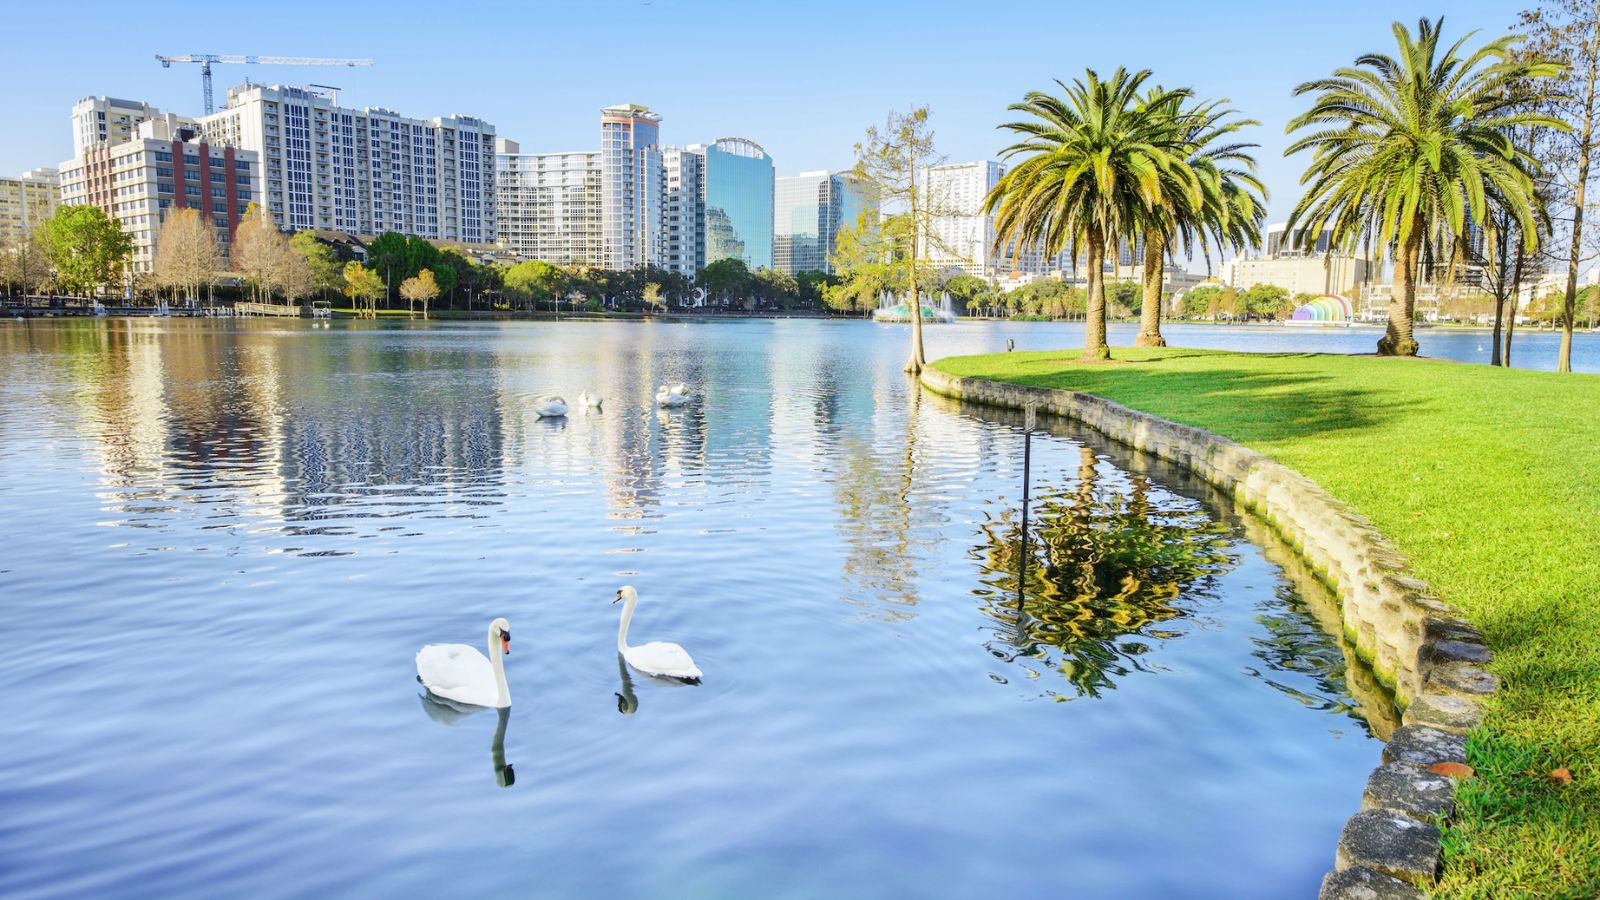 <p>Florida isn’t just about relaxing – it’s about exciting experiences too. Living here puts you close to some of the most famous attractions in the world. It’s perfect for entertaining visiting family or indulging in your own adventures.</p>